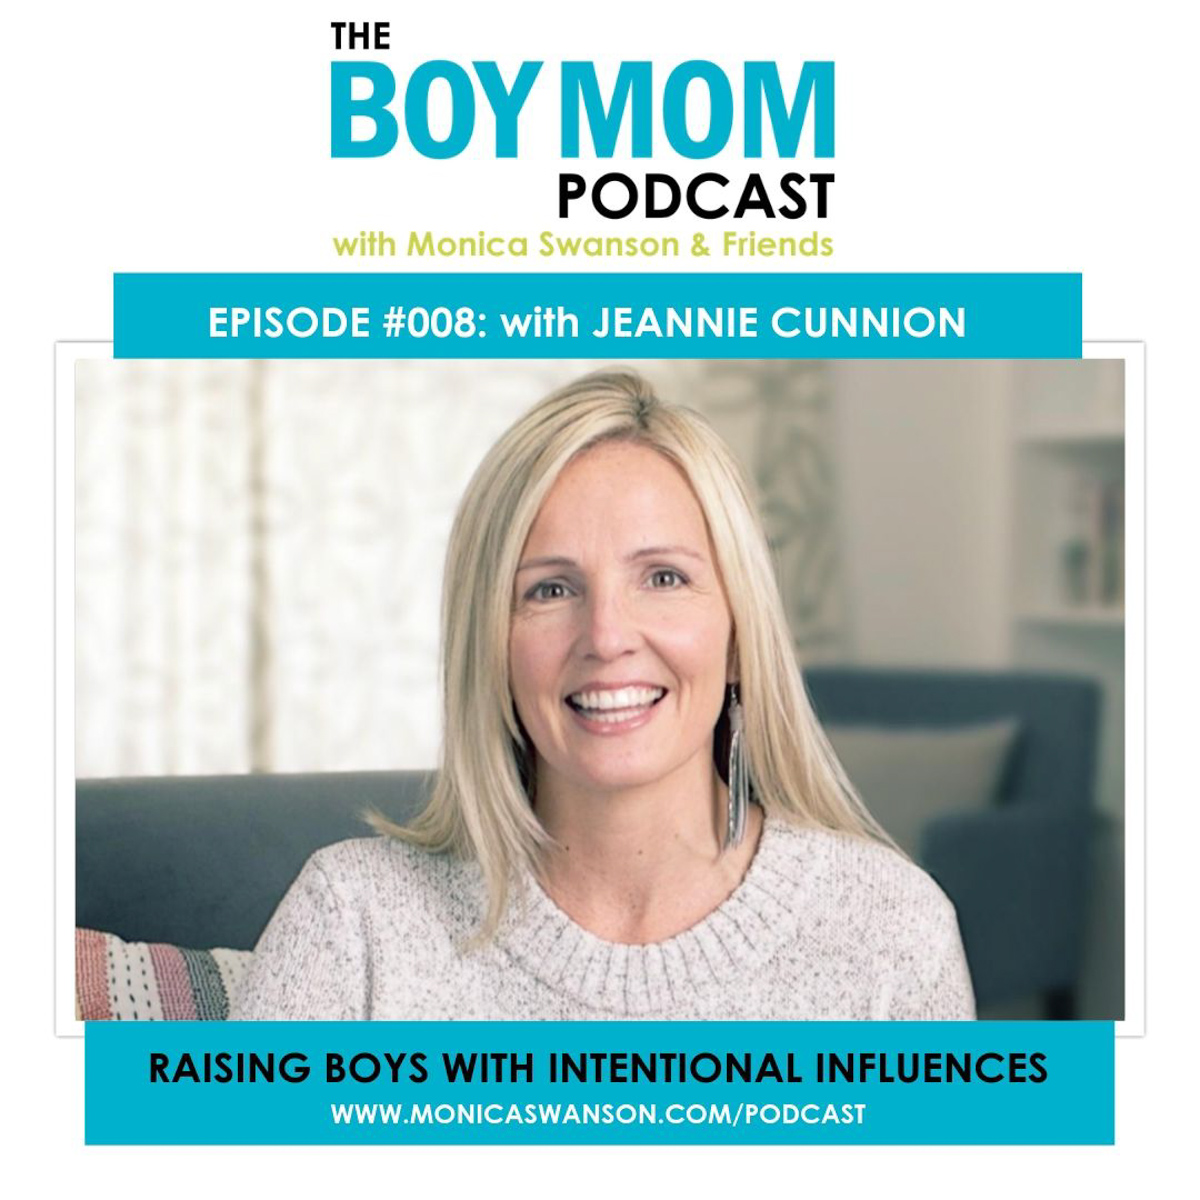 Raising Boys with Intentional Influences {Podcast Episode 008 with Jeannie Cunnion}